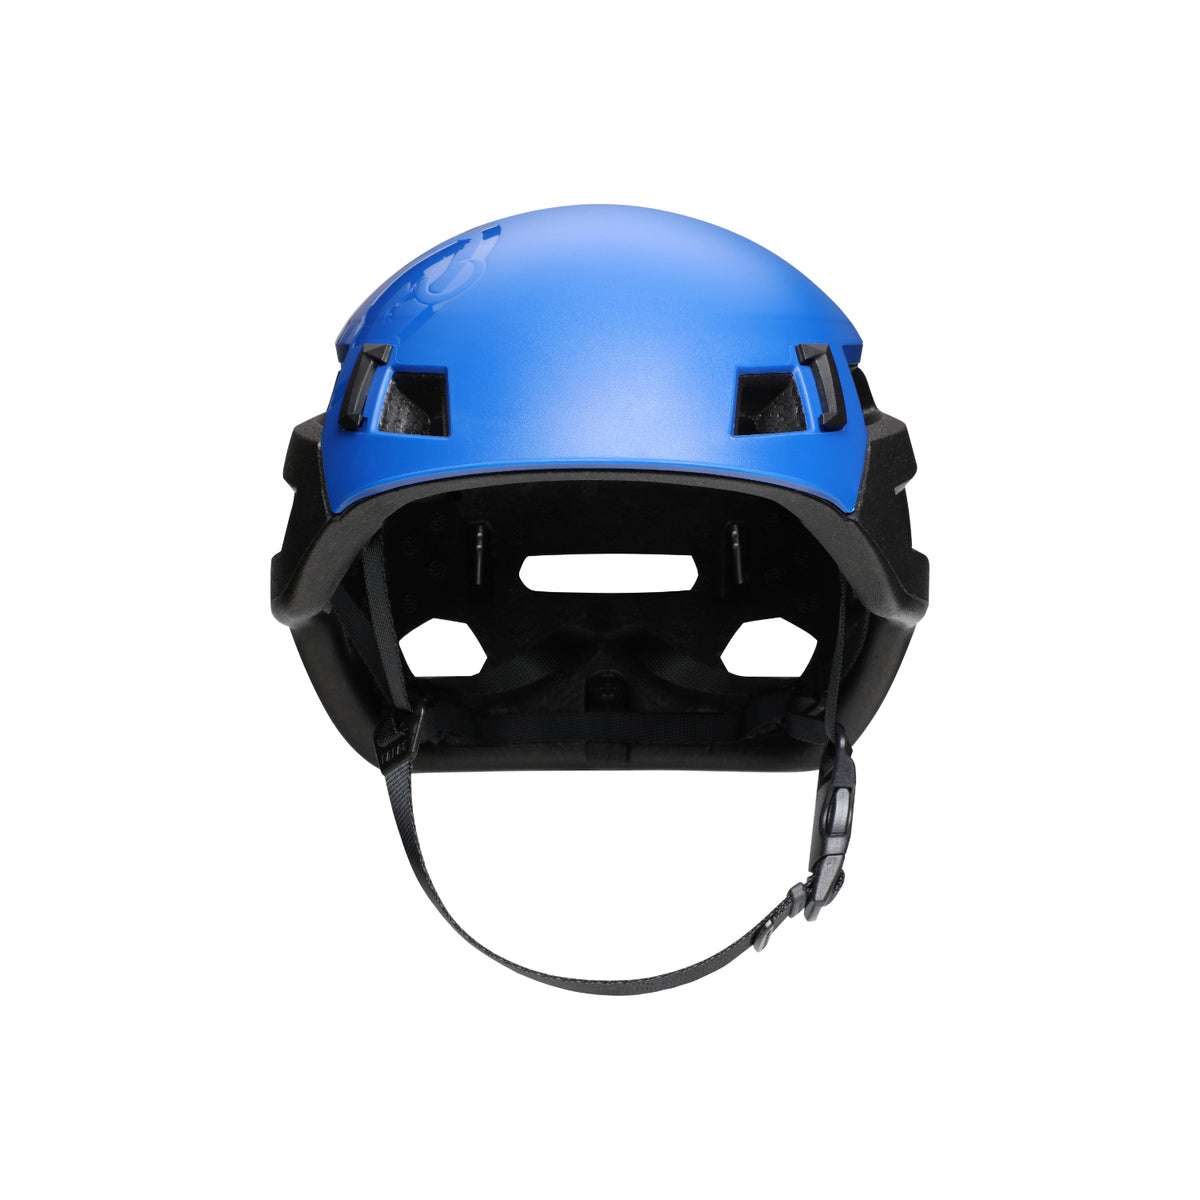 Mammut Wall Rider helmet in surf blue and black colour, from the front view